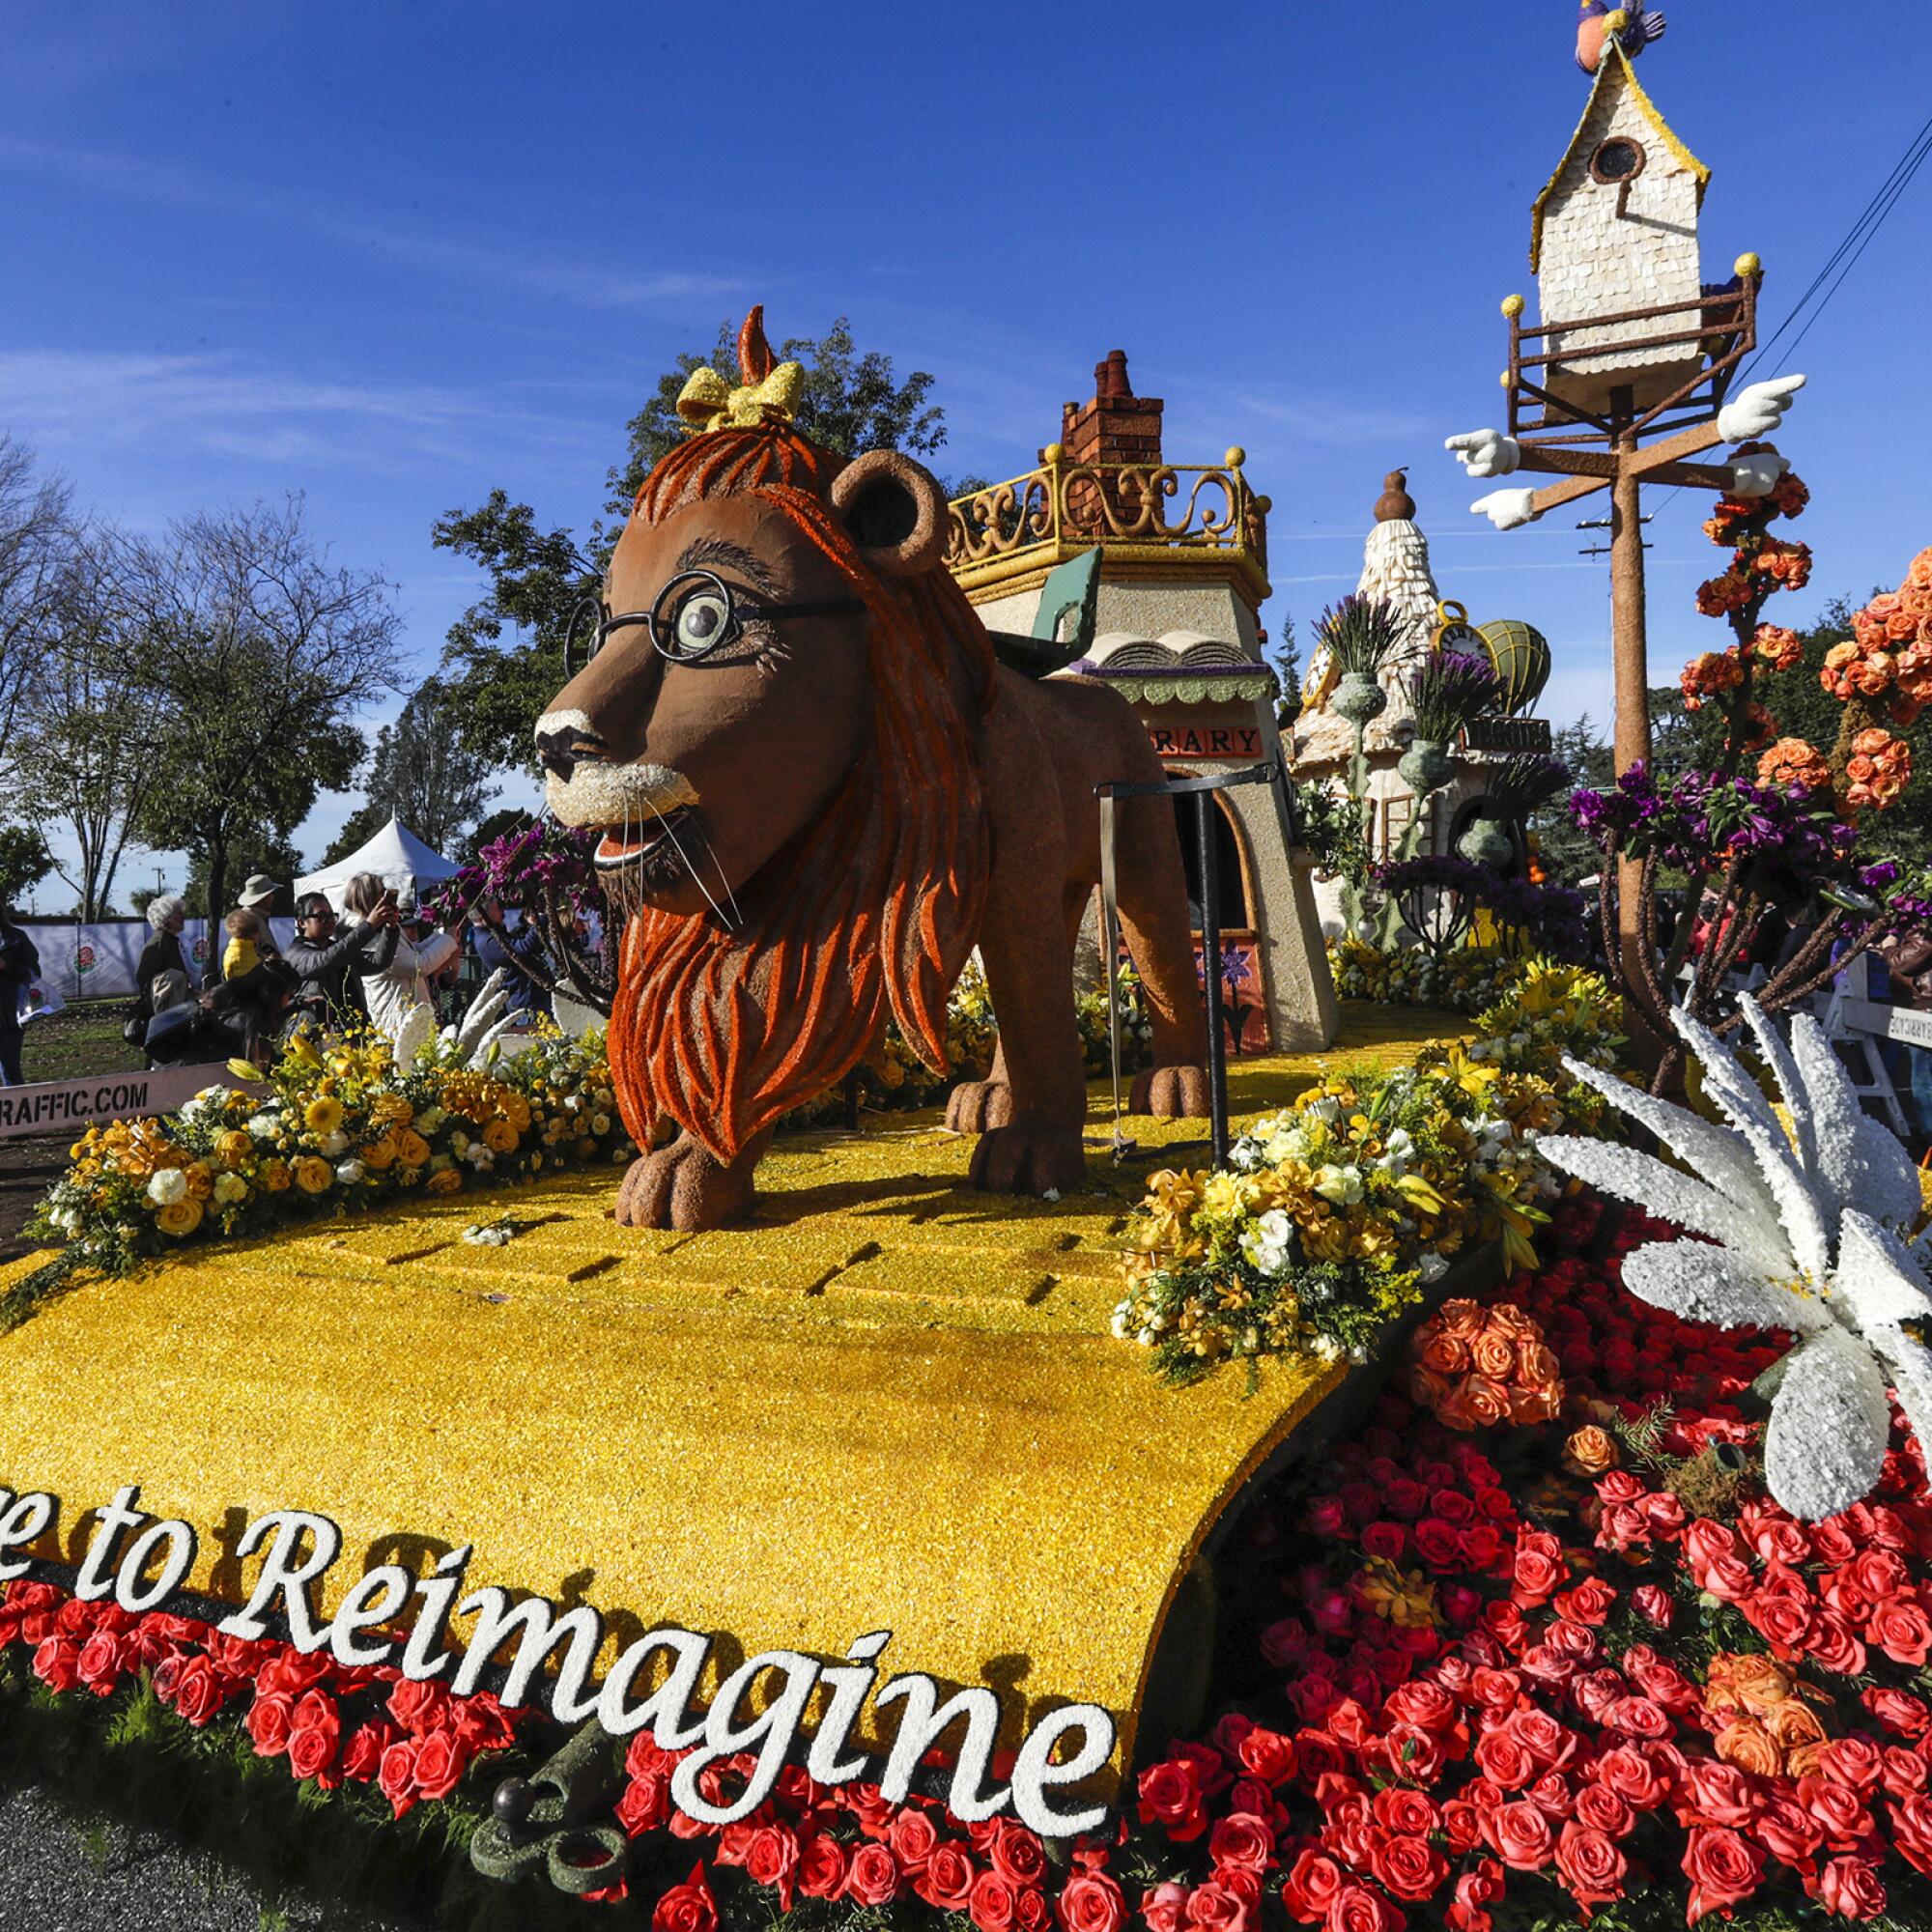 The Tournament of Roses is an iconic parade in Pasadena